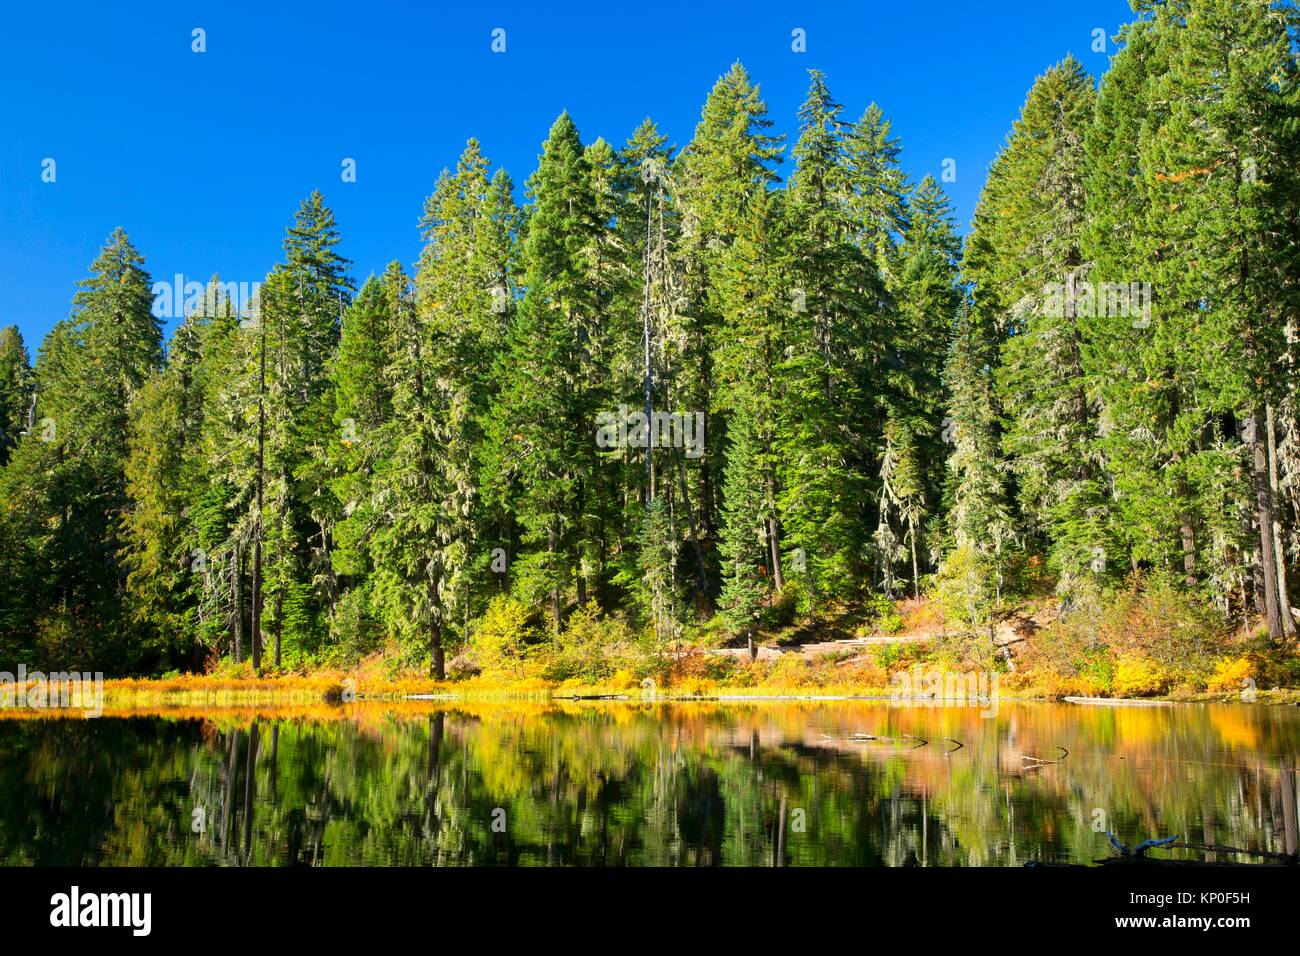 Daly Lake, Willamette National Forest, Oregon. Stock Photo